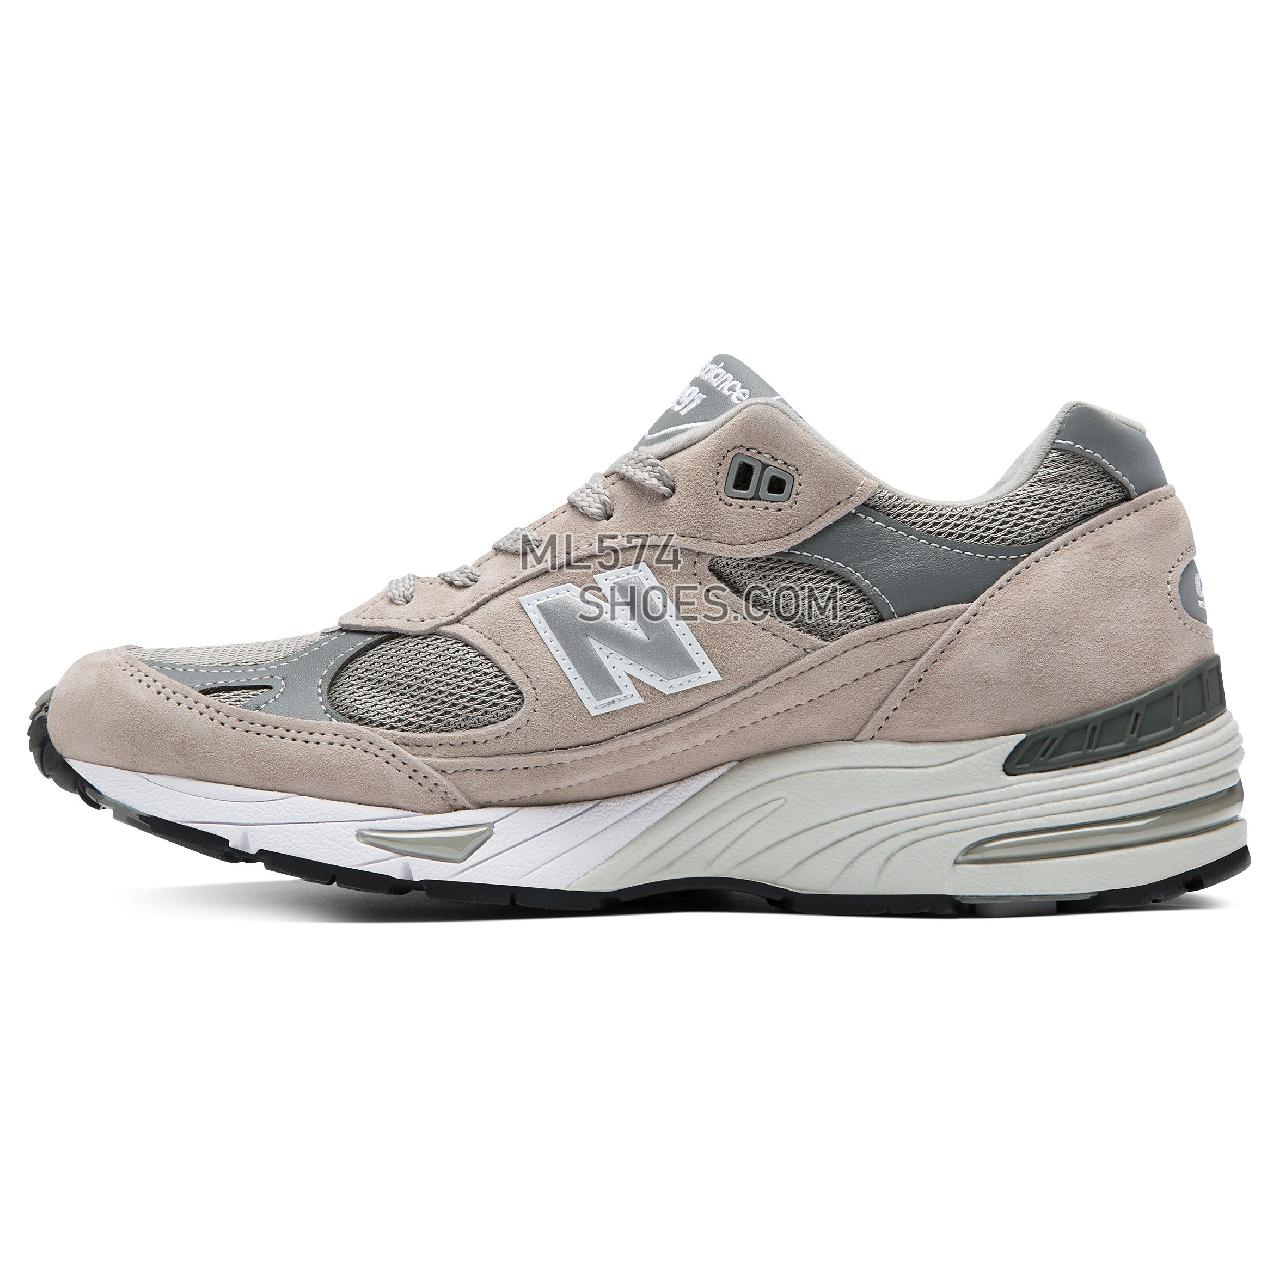 New Balance Made in UK 991 Leather - Men's Leather 991 - Grey - M991GL